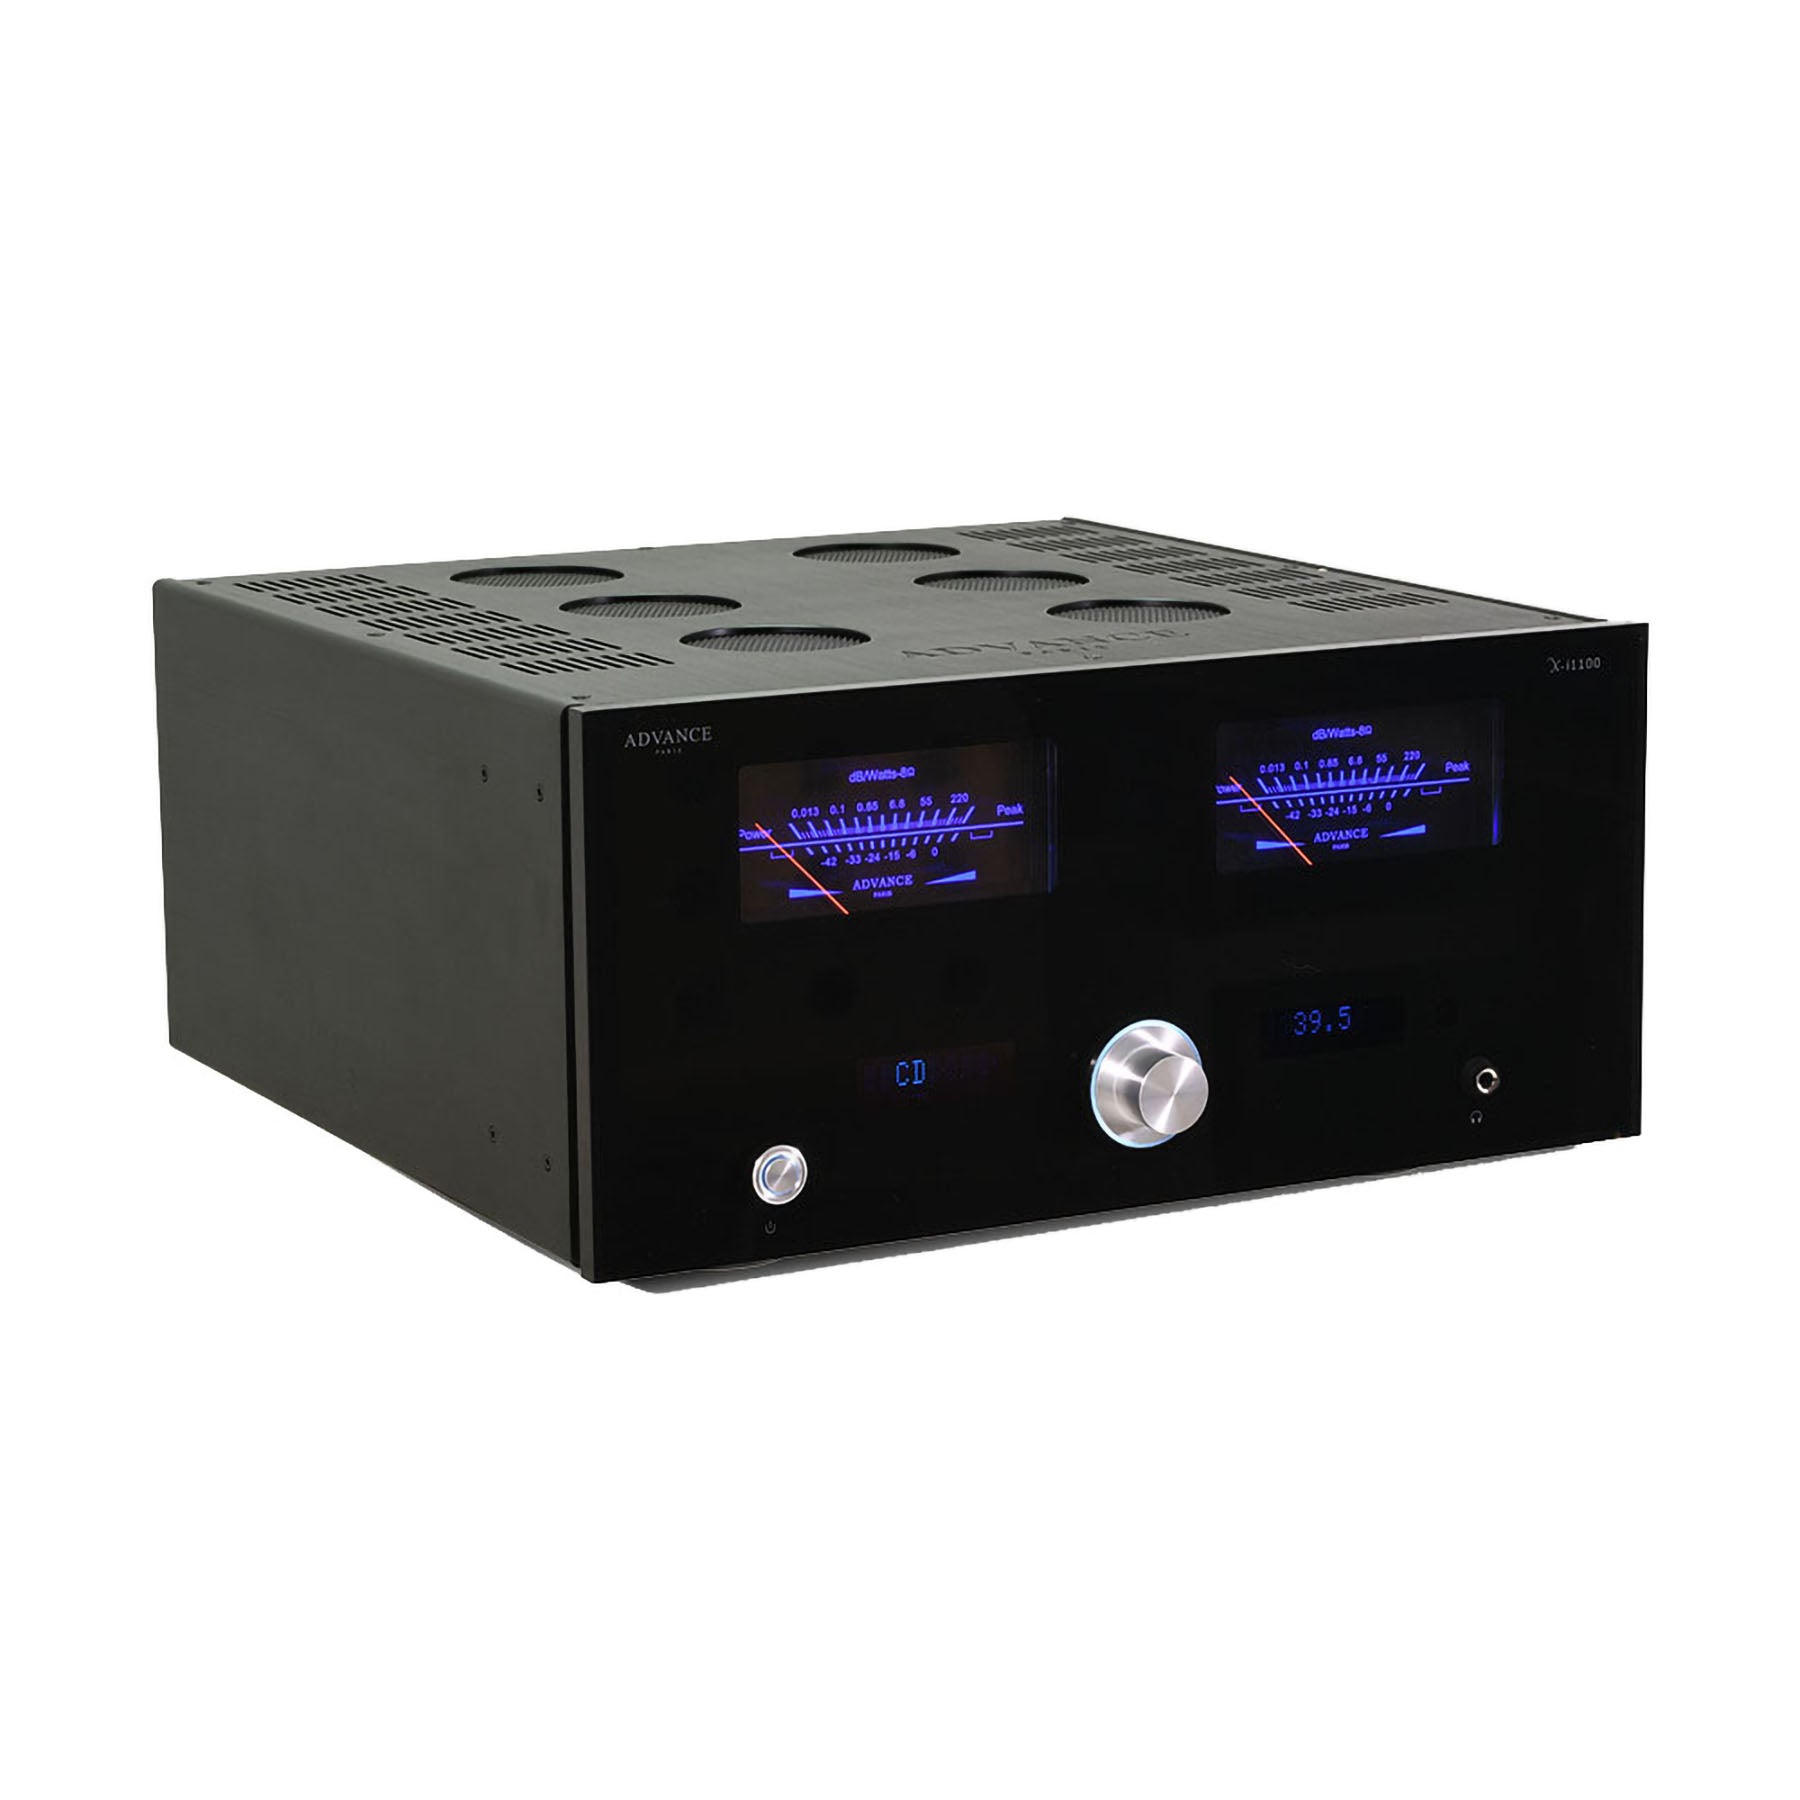 Advance Paris X-i1100 Integrated Stereo Amplifier